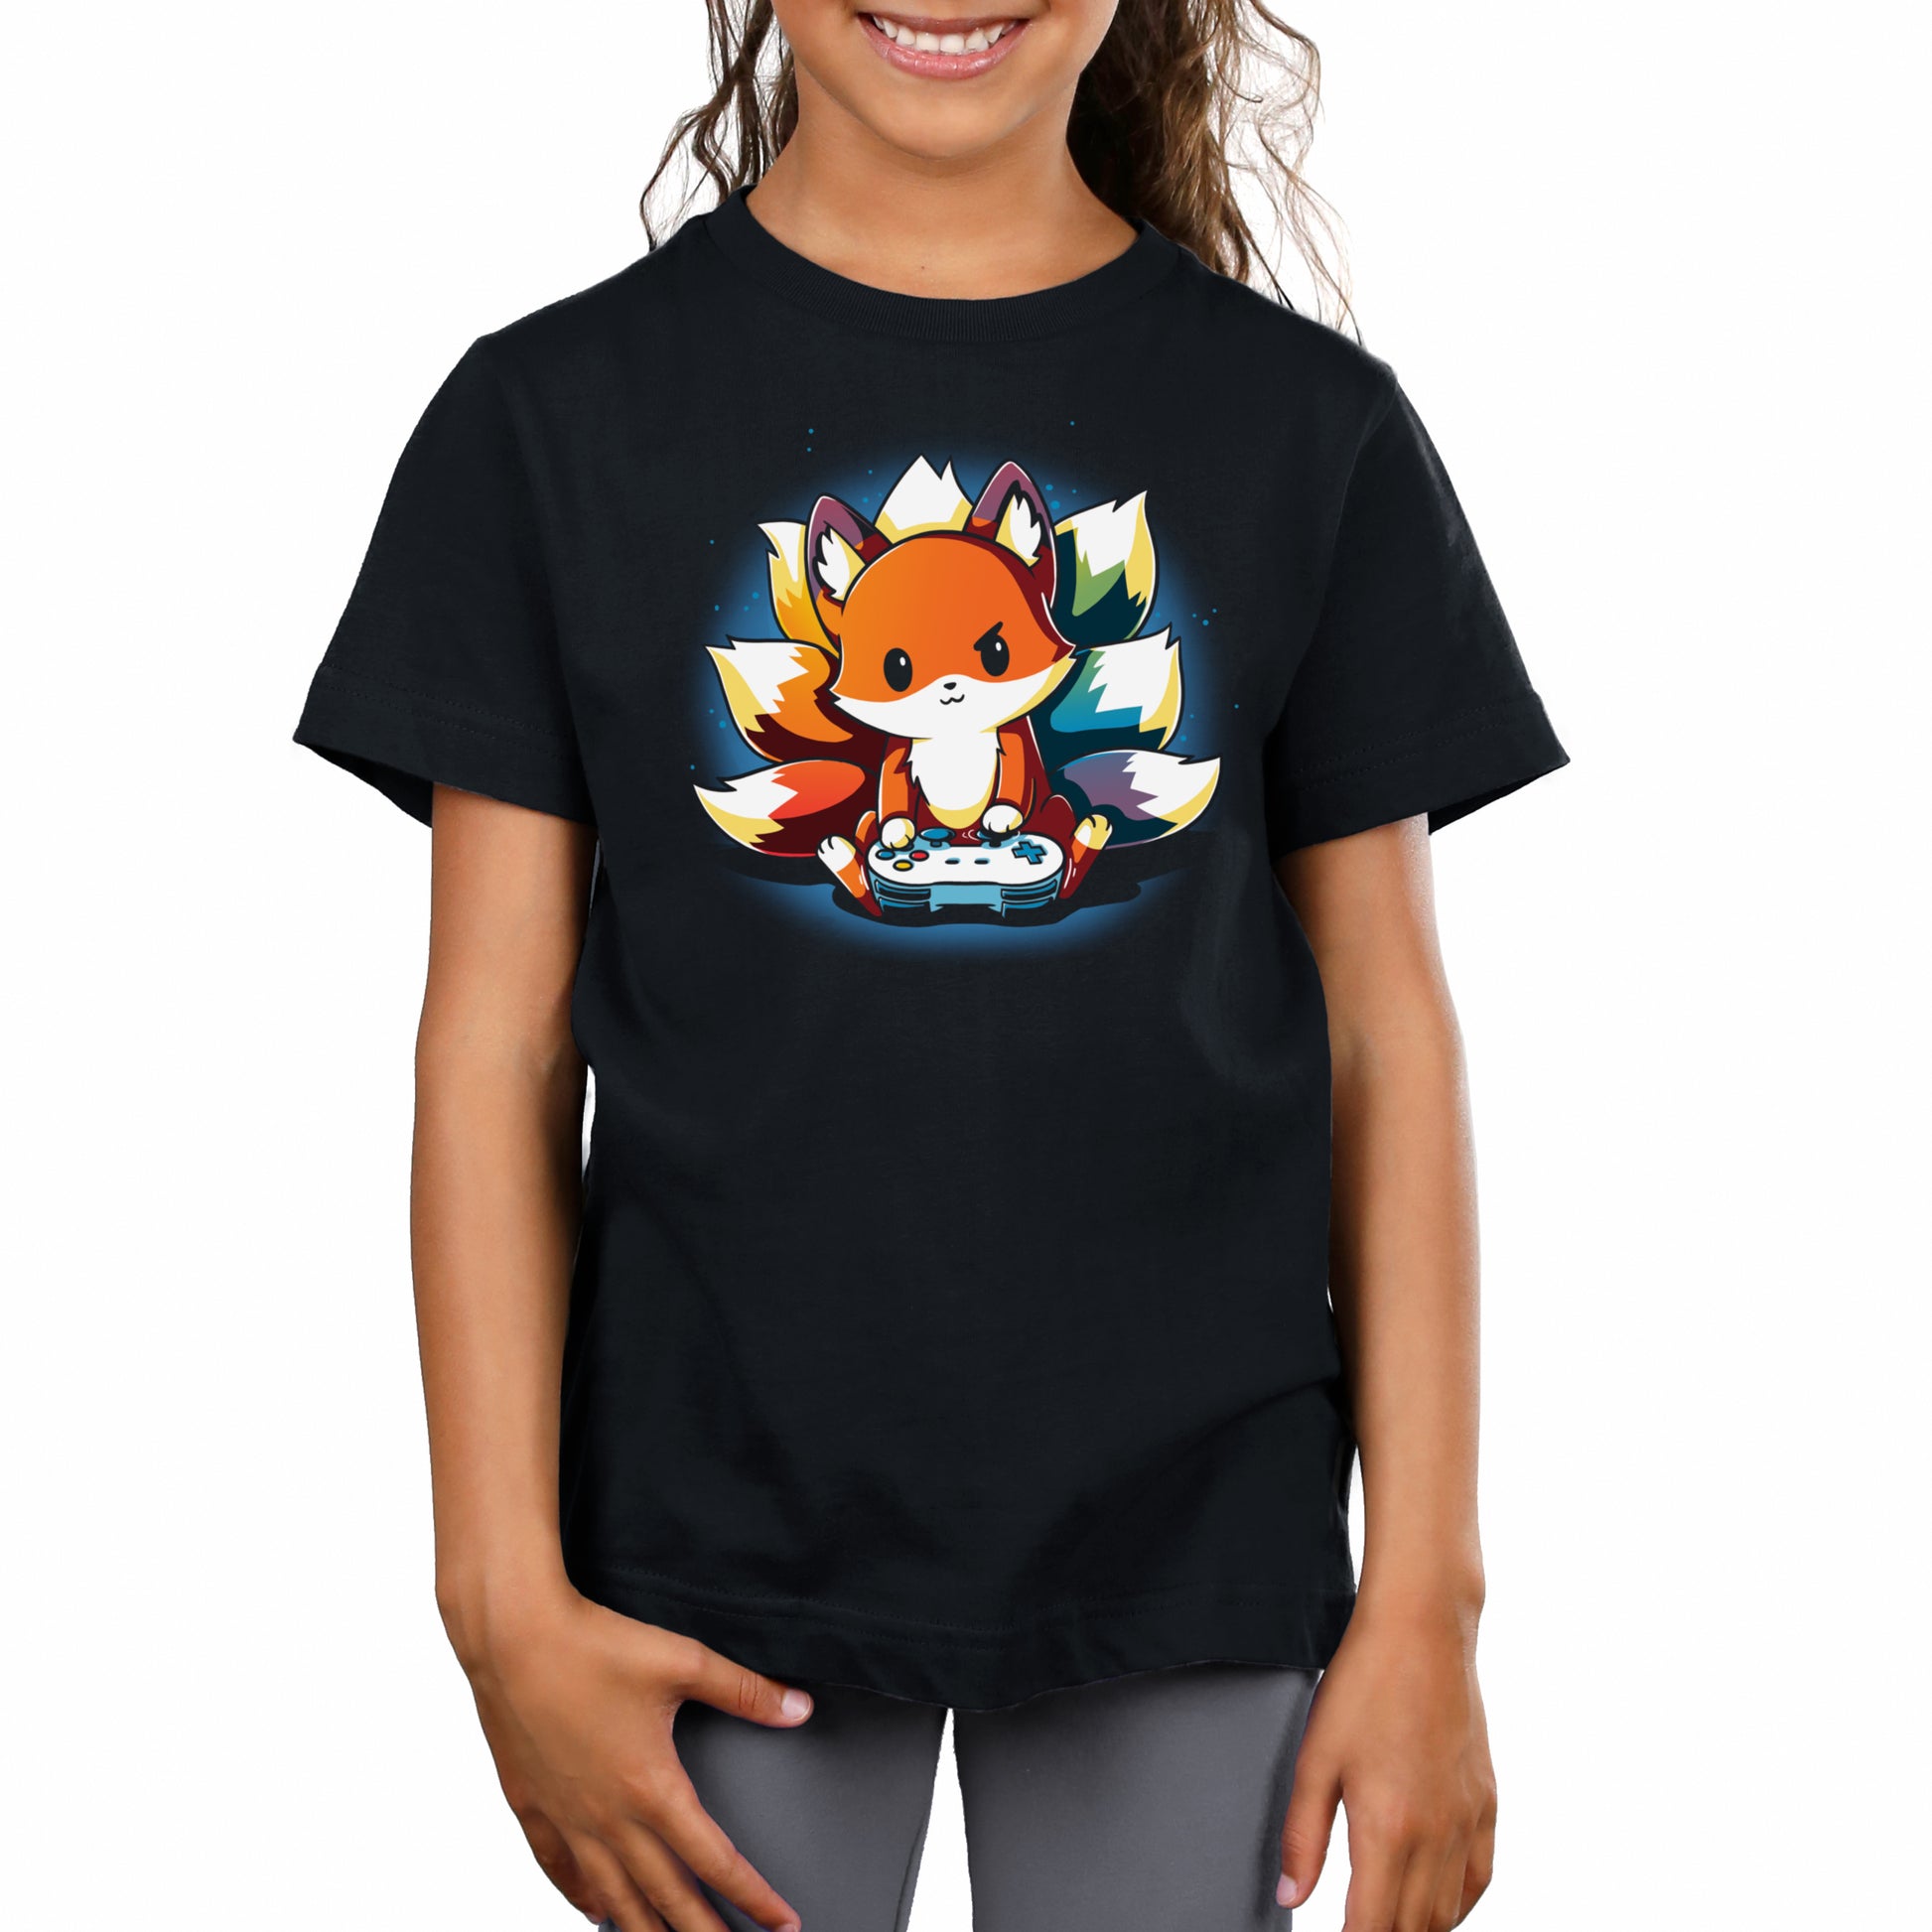 A child wearing a super soft ringspun cotton, unisex tee featuring a cartoon fox playing a video game against a colorful background. This Rainbow Gamer by monsterdigital is perfect for any young gaming enthusiast.